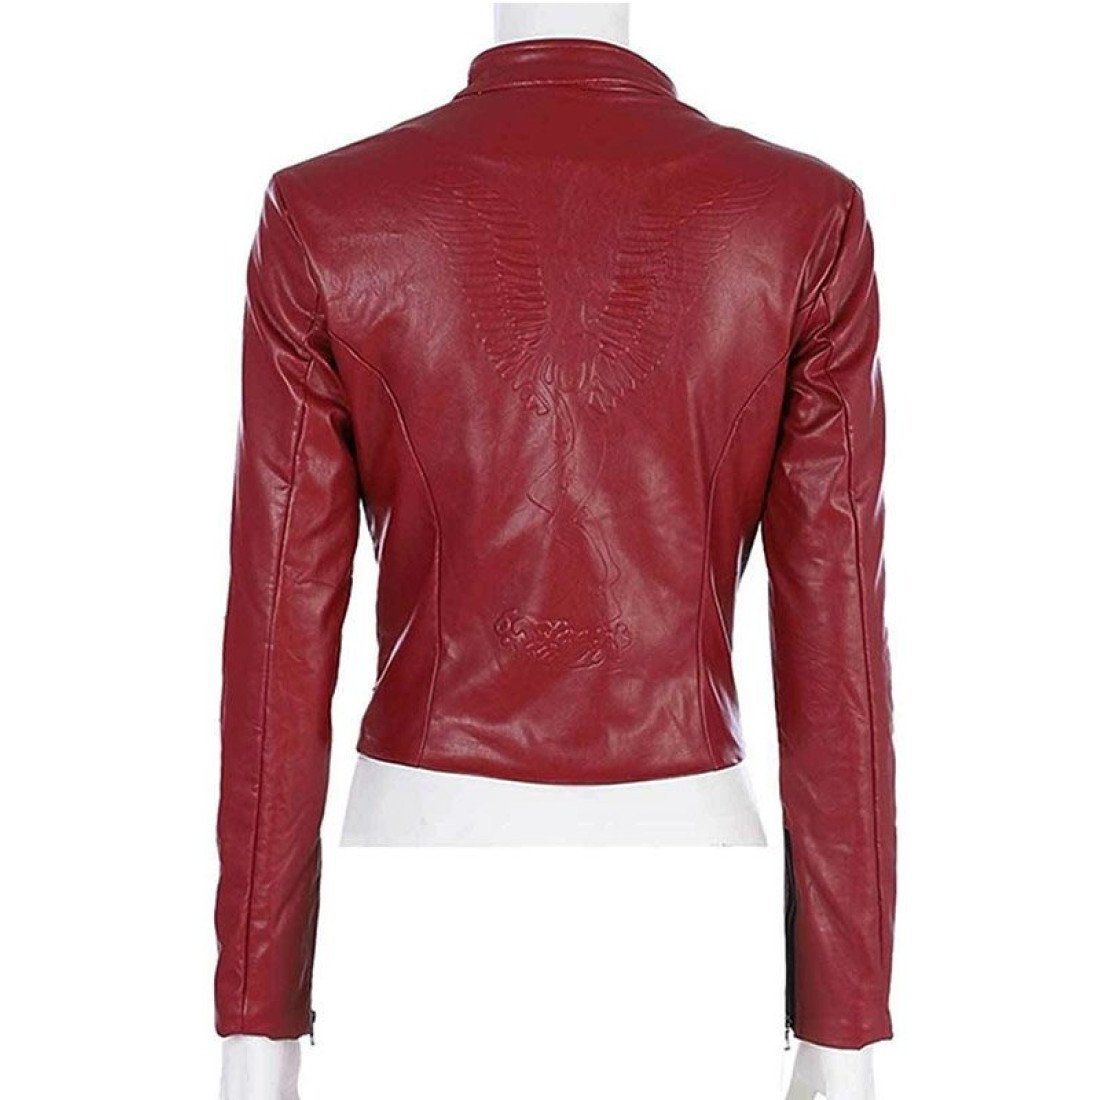 Resident Evil 2 Claire Redfield Red Jacket - Films Jackets